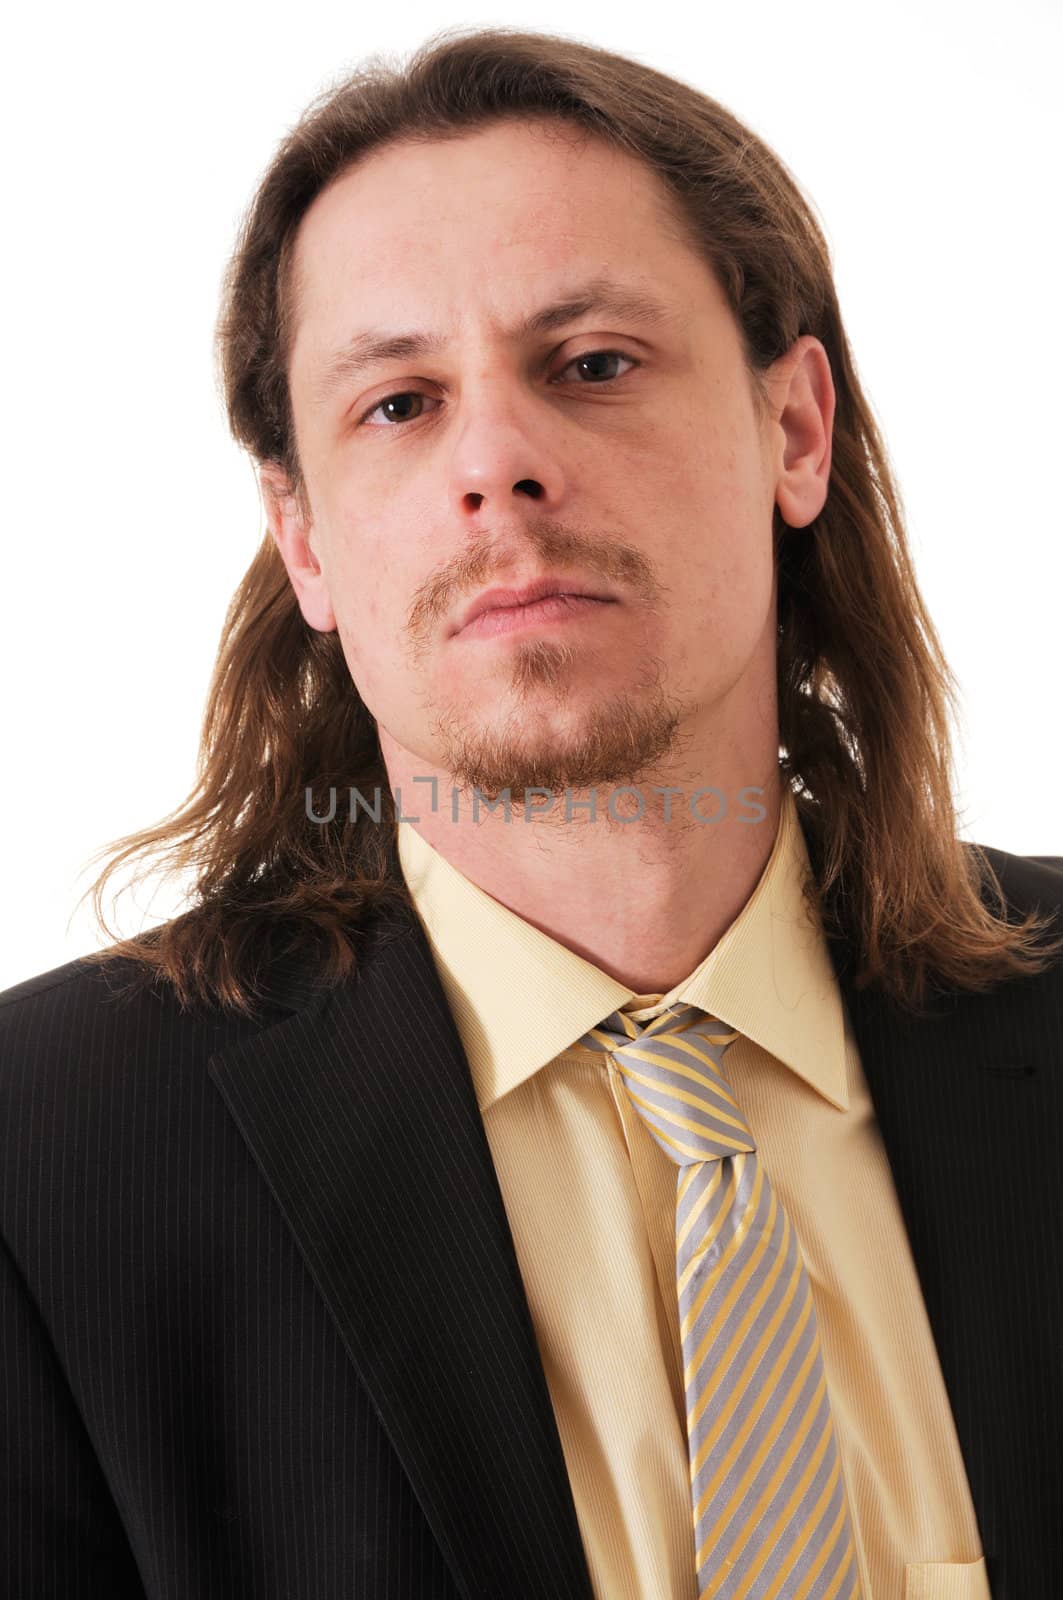 Young serious business man isolated on white background.